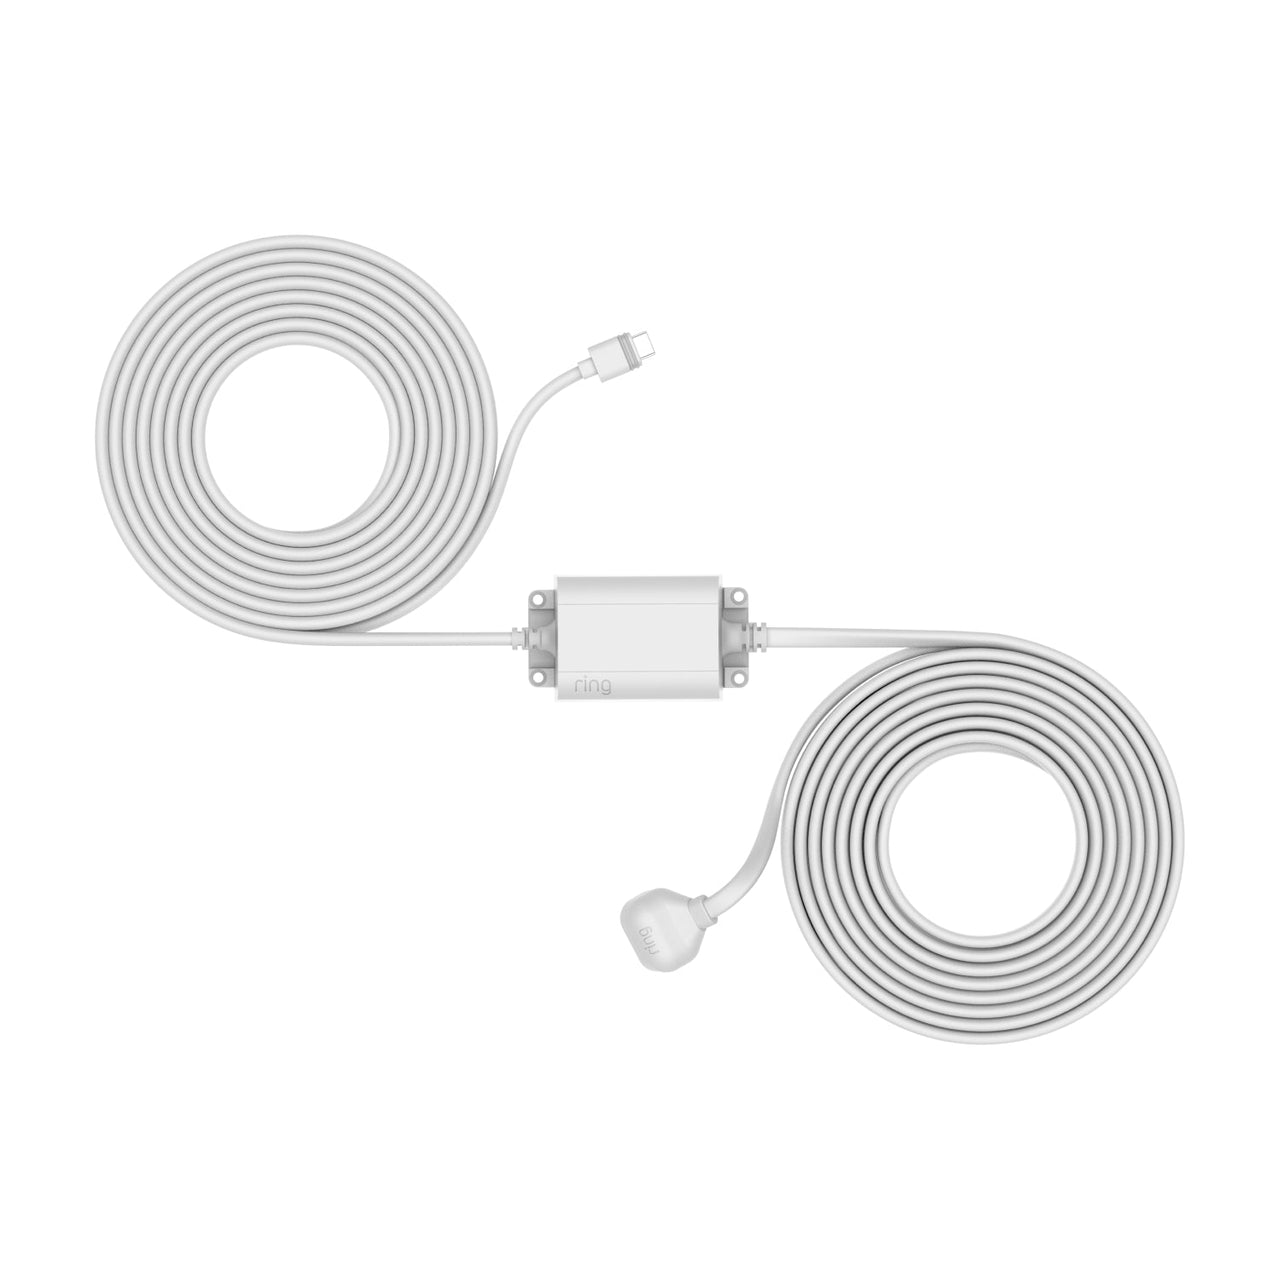 products/ring_indoor_outdoor_power_adapter_usb-c_assembled_wht_1500x1500_1_d1ab45c7-649f-4fdc-b709-7f3bd218b669.jpg